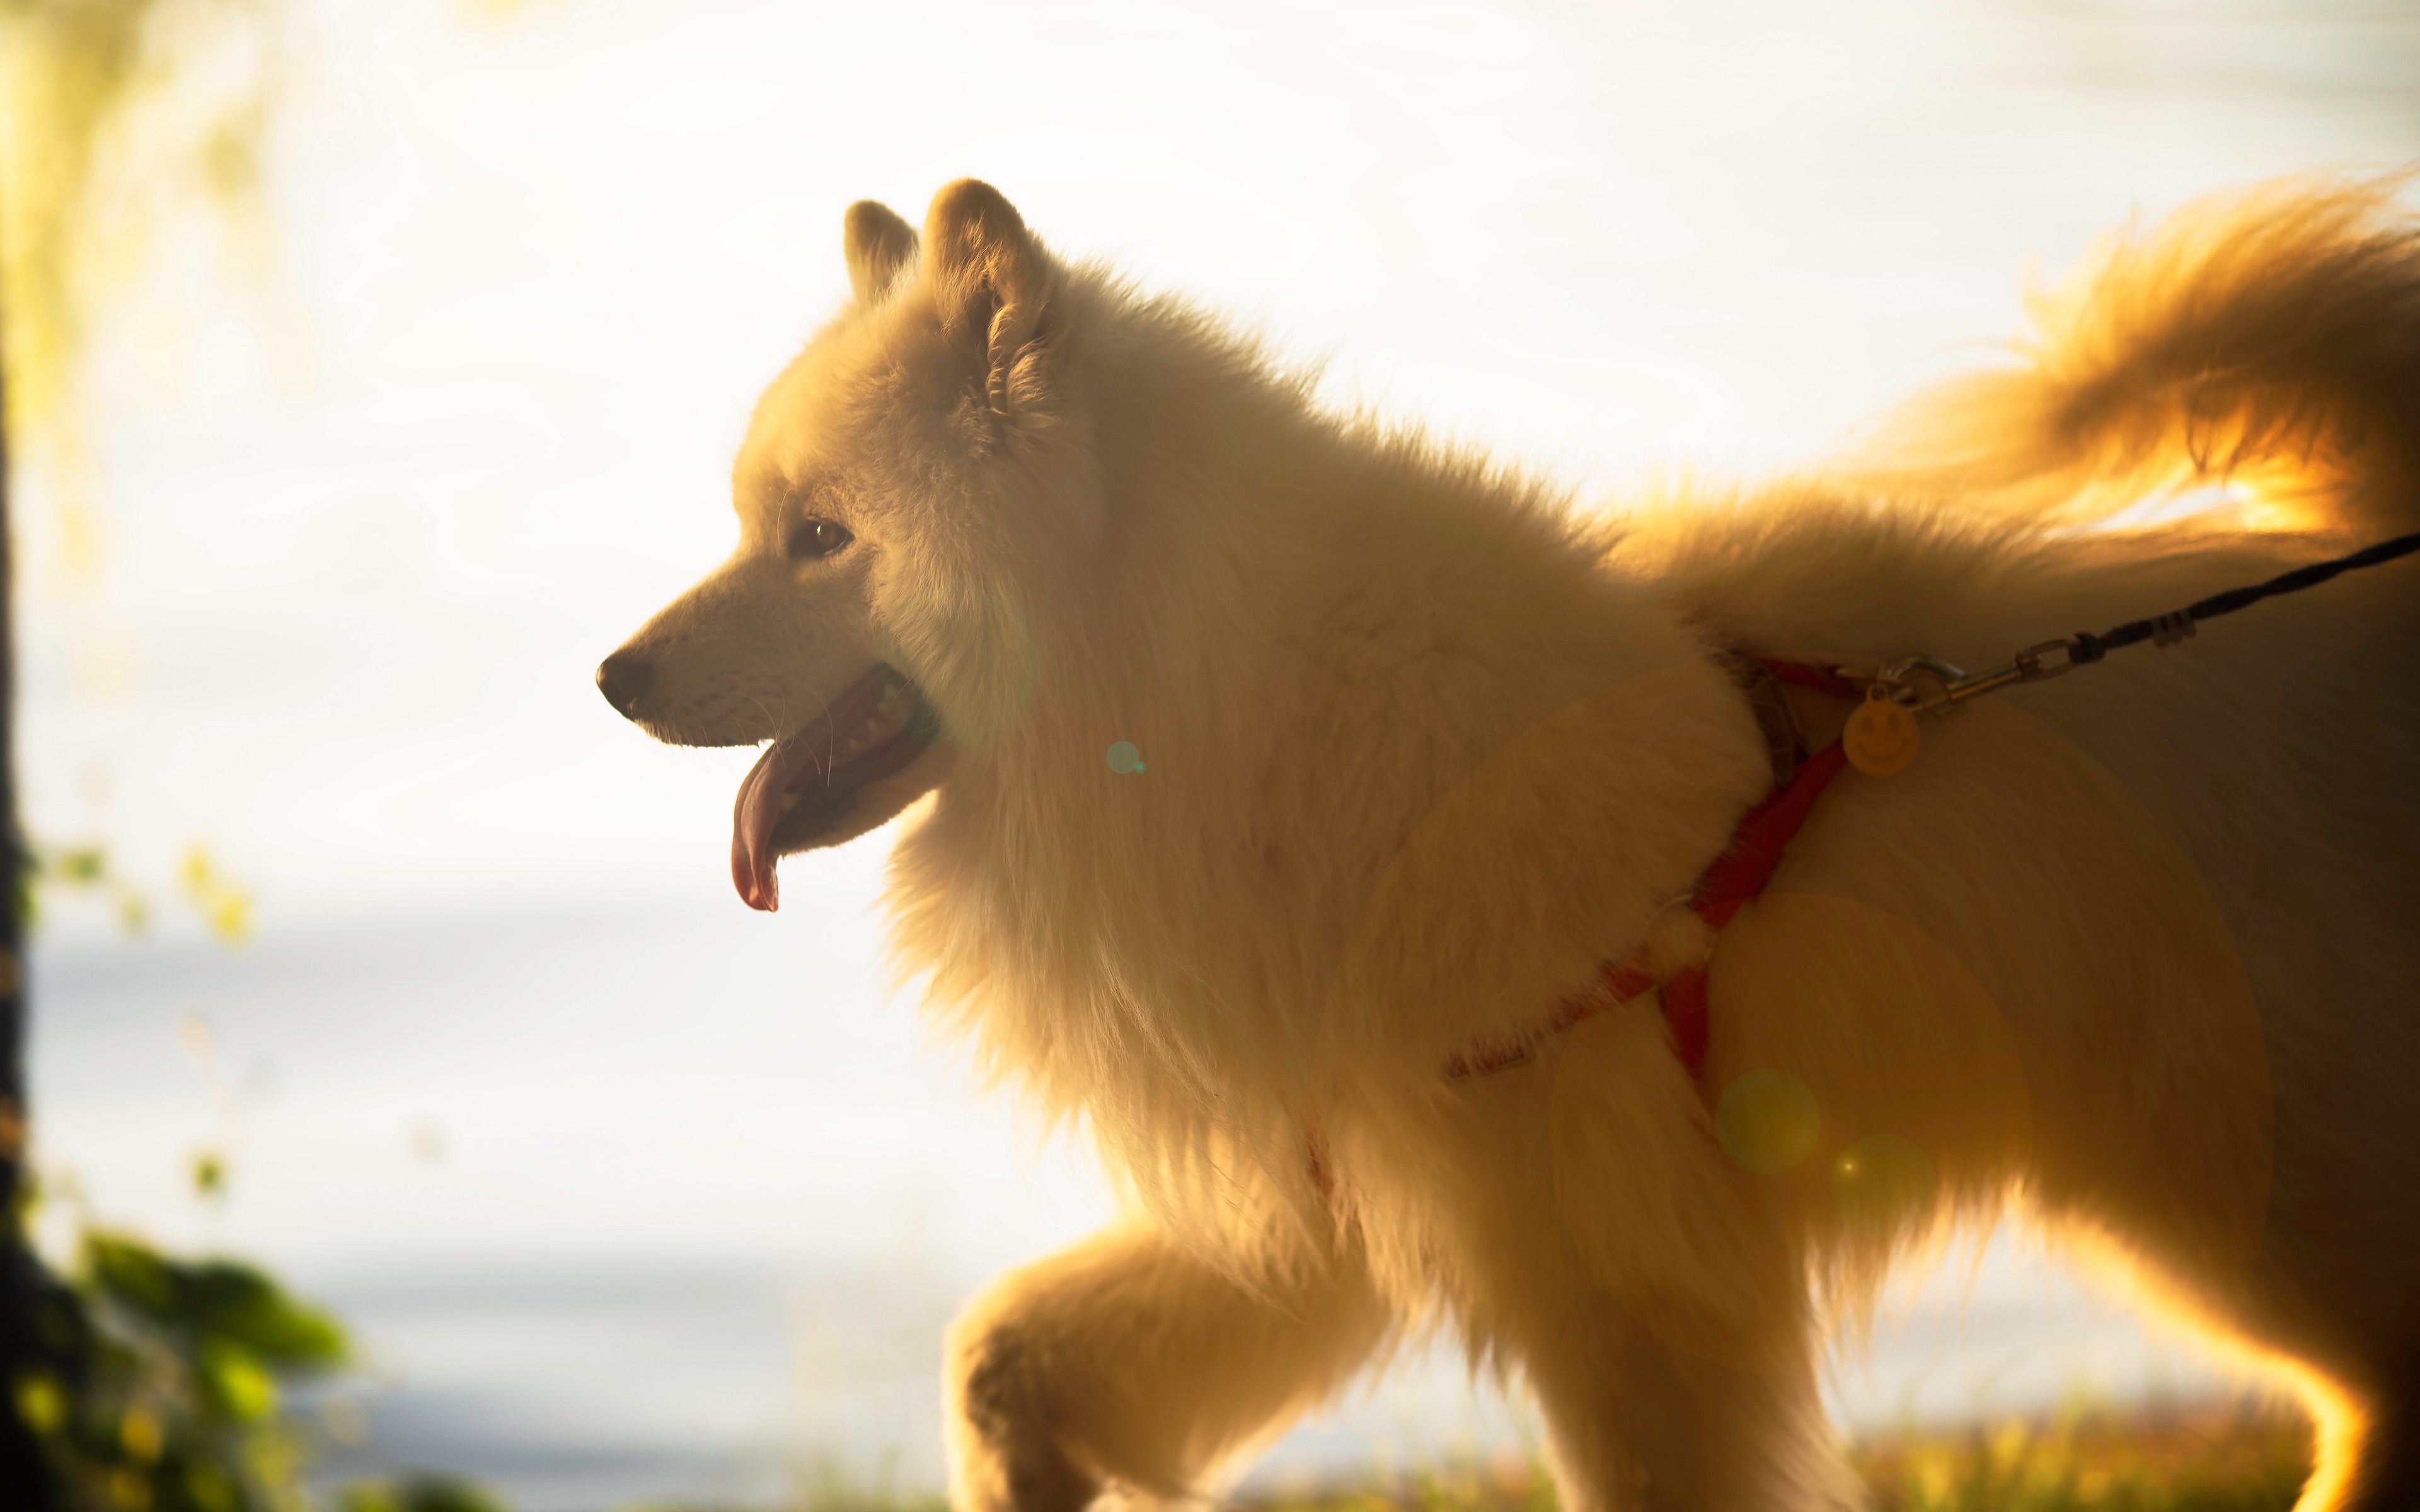 General 3840x2400 animals tongue out dog mammals closeup Samoyed side view natural light fur smiley leash